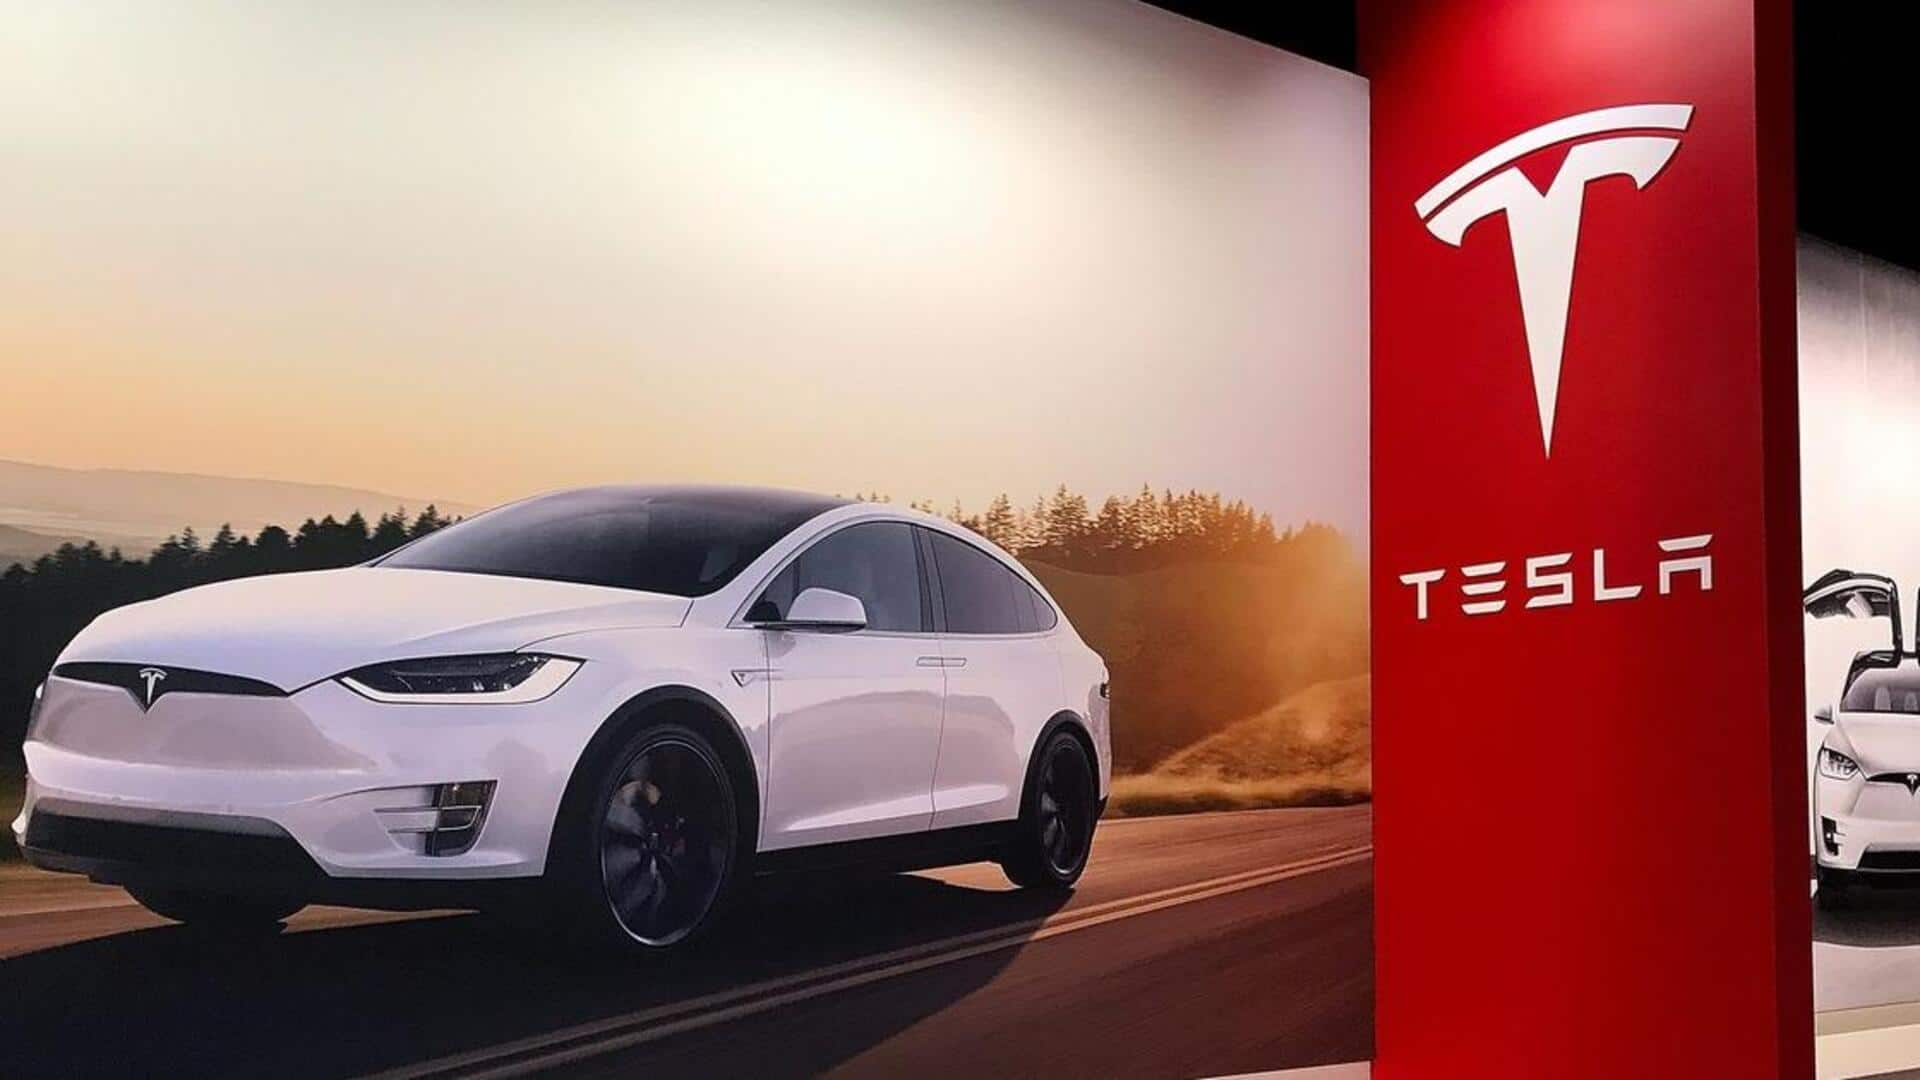 Tesla slashes prices of cars globally amid falling sales